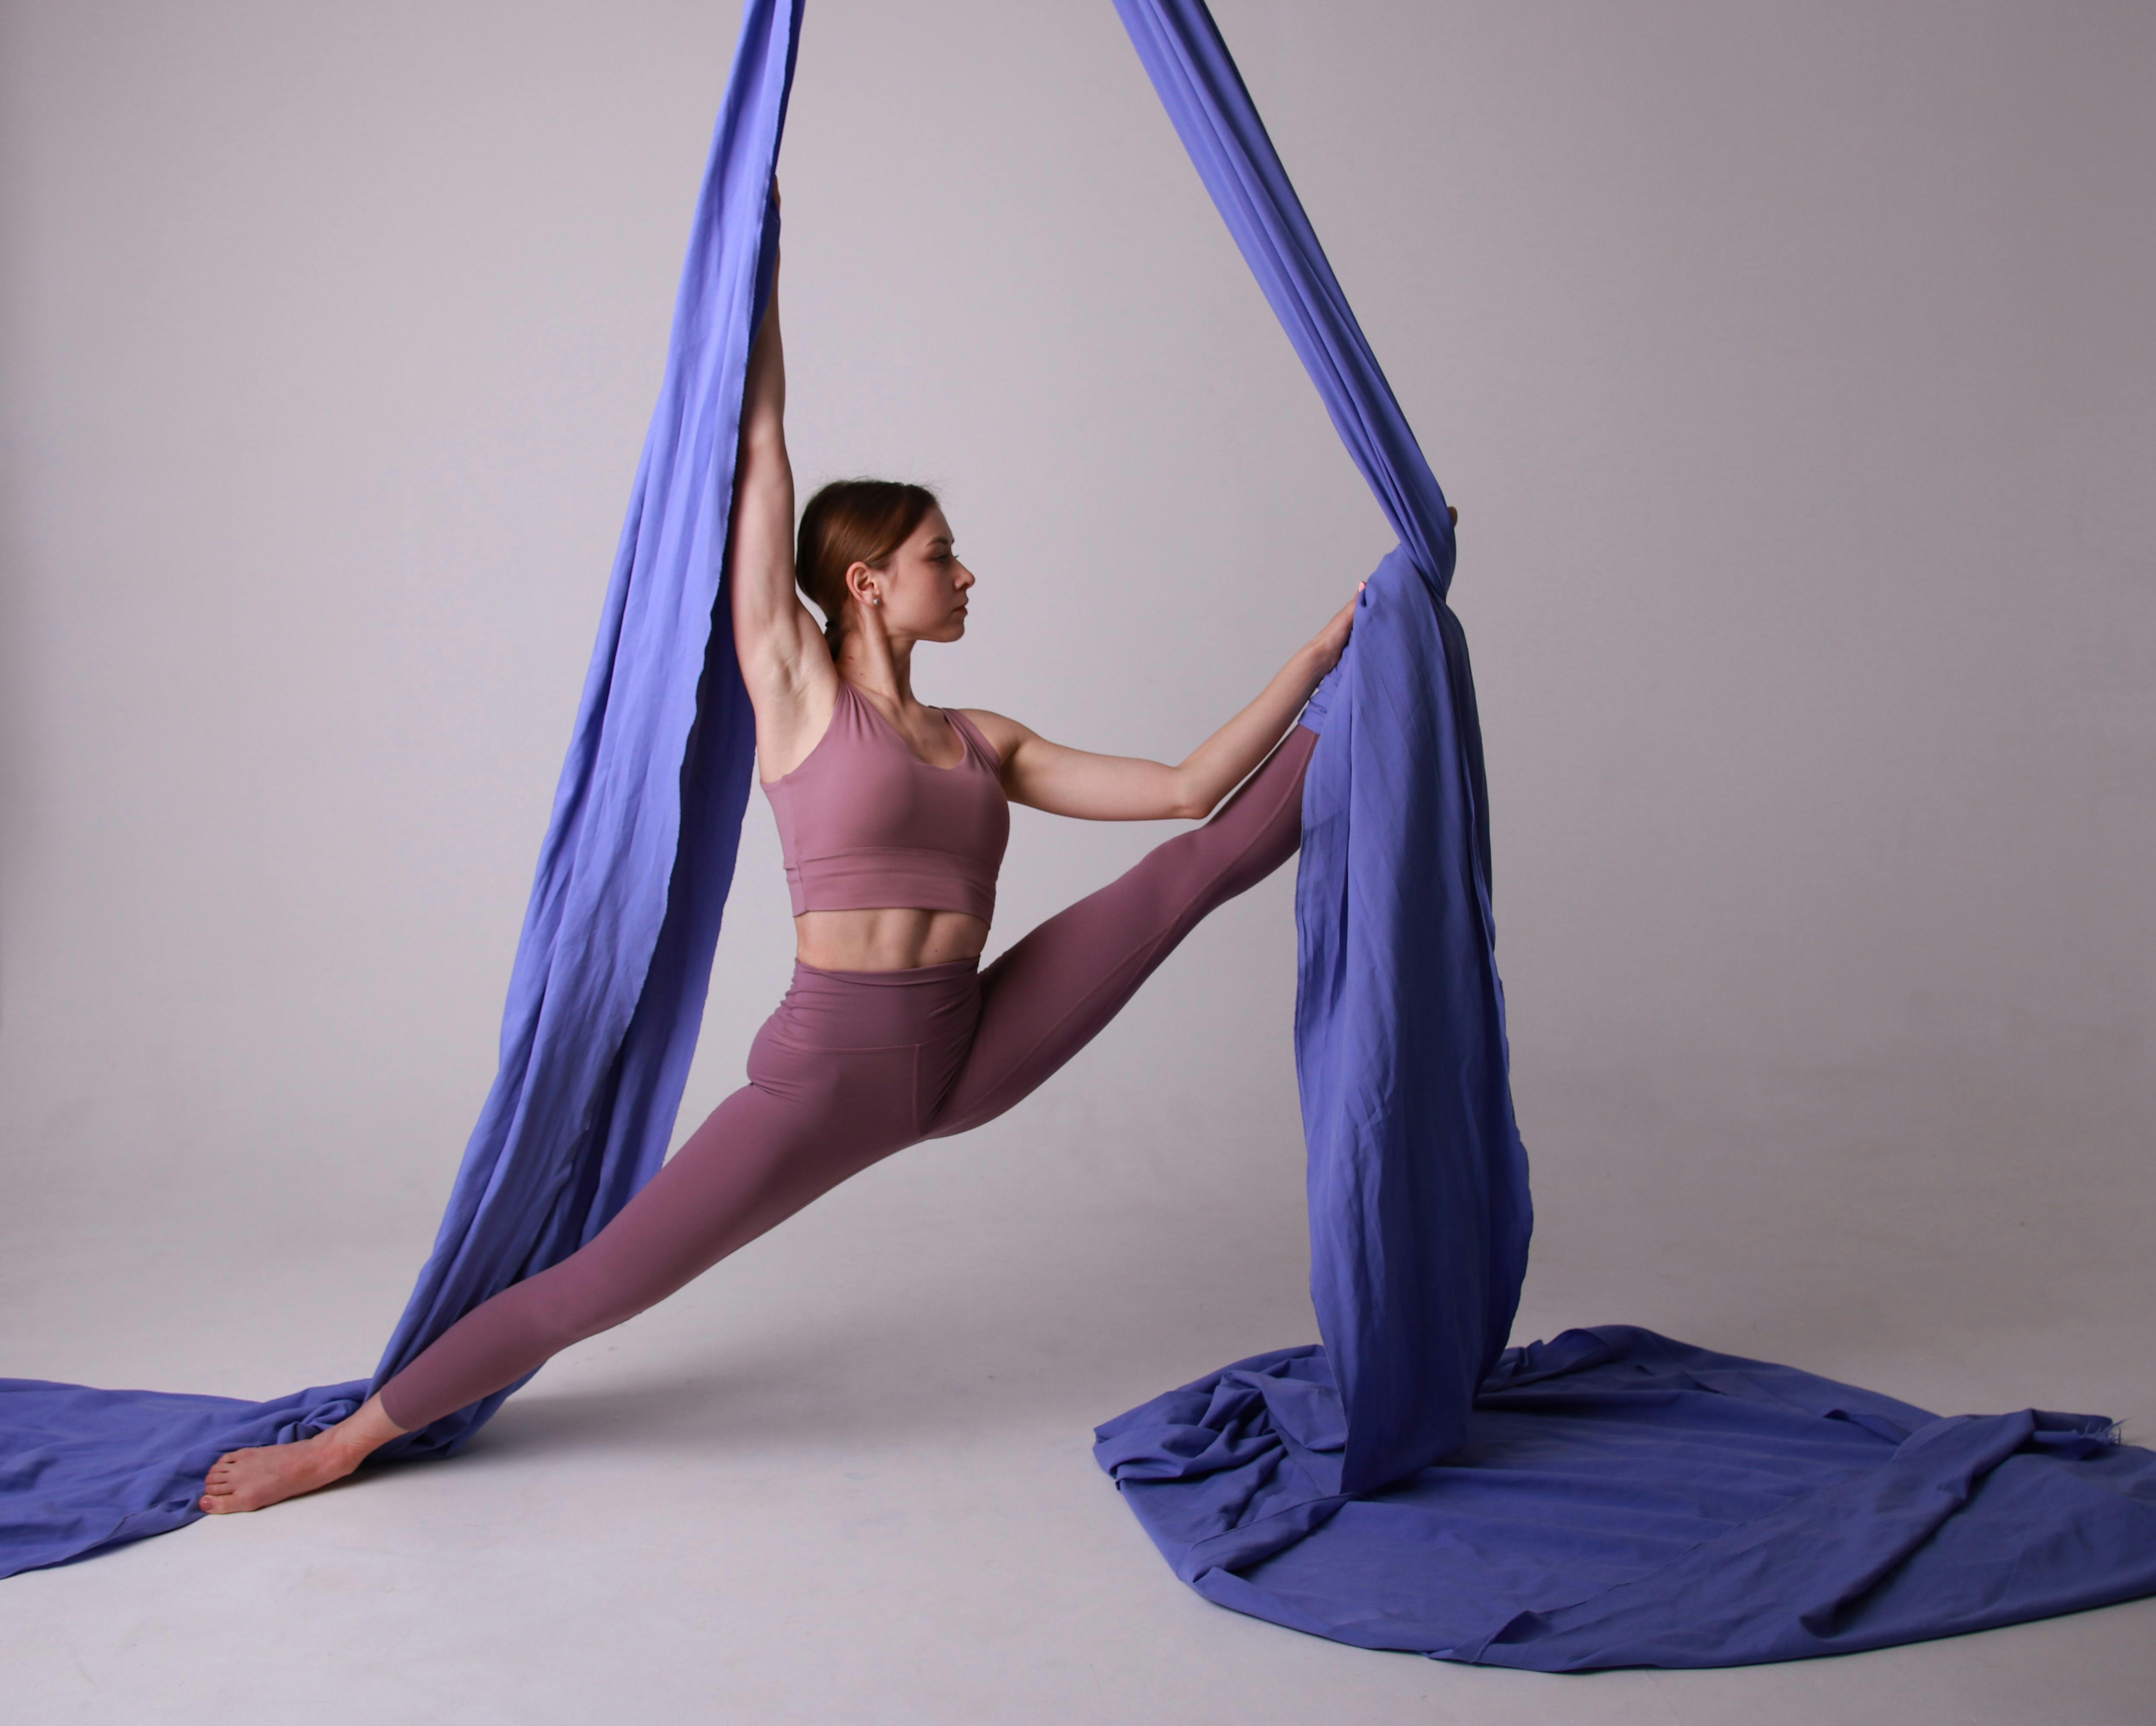 The Best Aerial Yoga Poses to Relieve Back Pain | Uplift Active